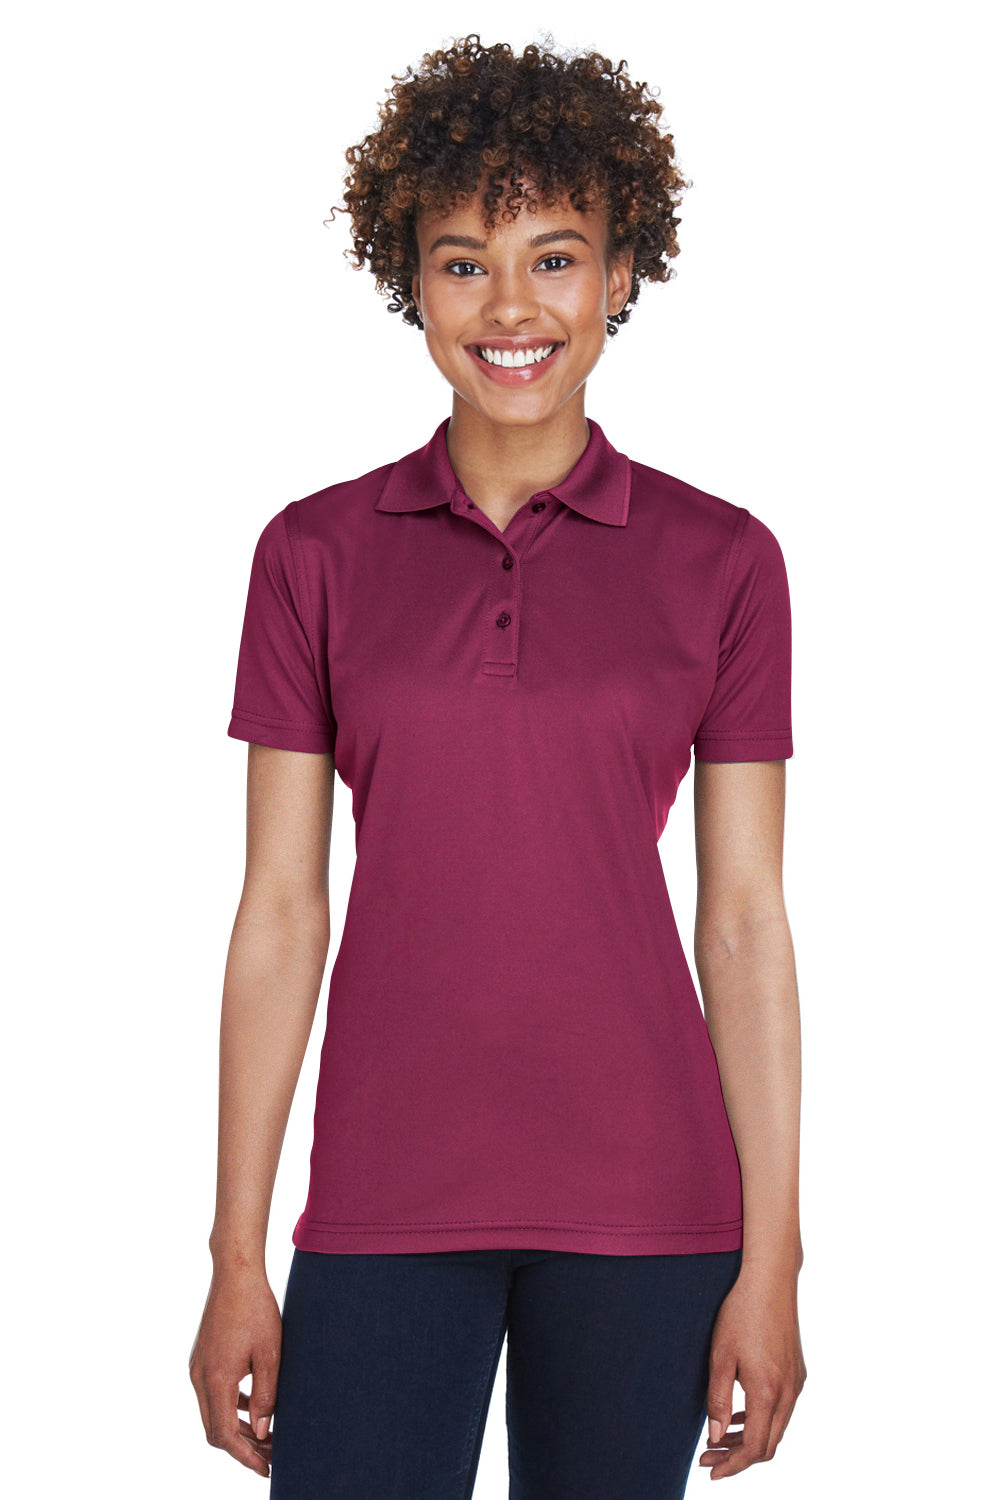 UltraClub 8210L Womens Cool & Dry Moisture Wicking Short Sleeve Polo Shirt Maroon Front